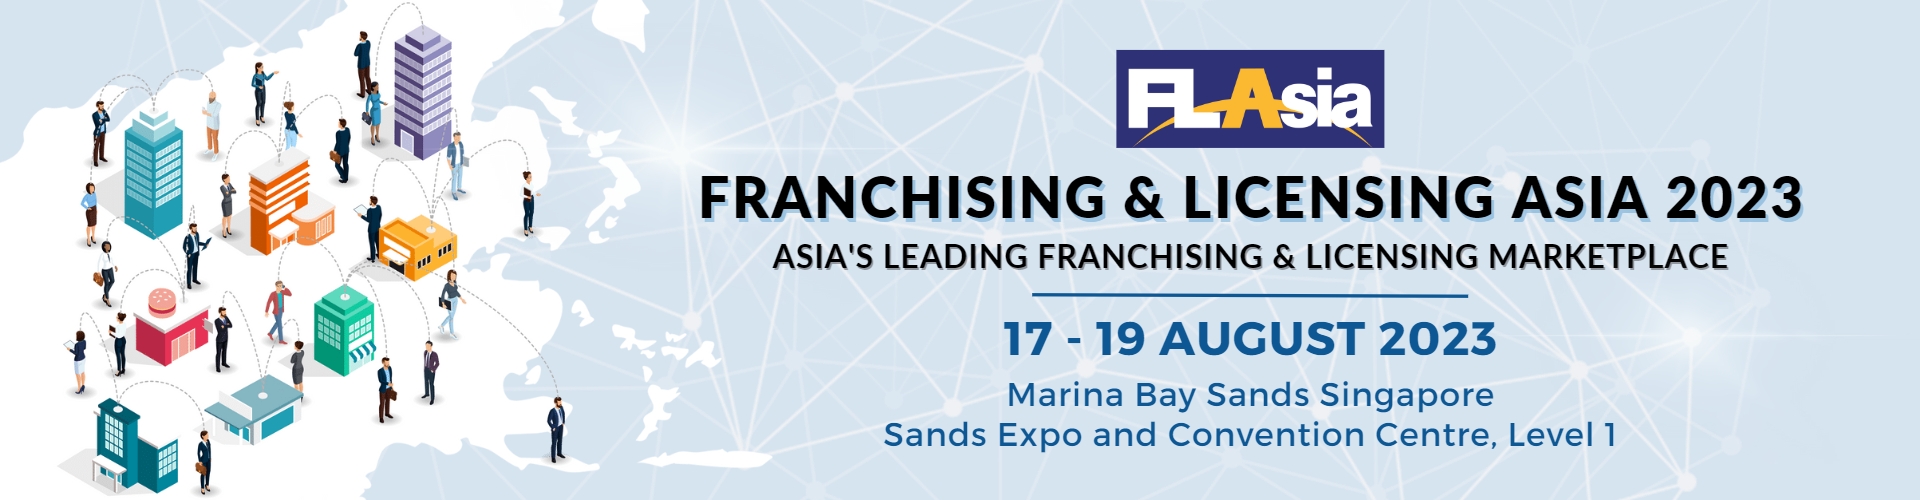 FLAsia FRANCHISING & LICENSING ASIA 2023